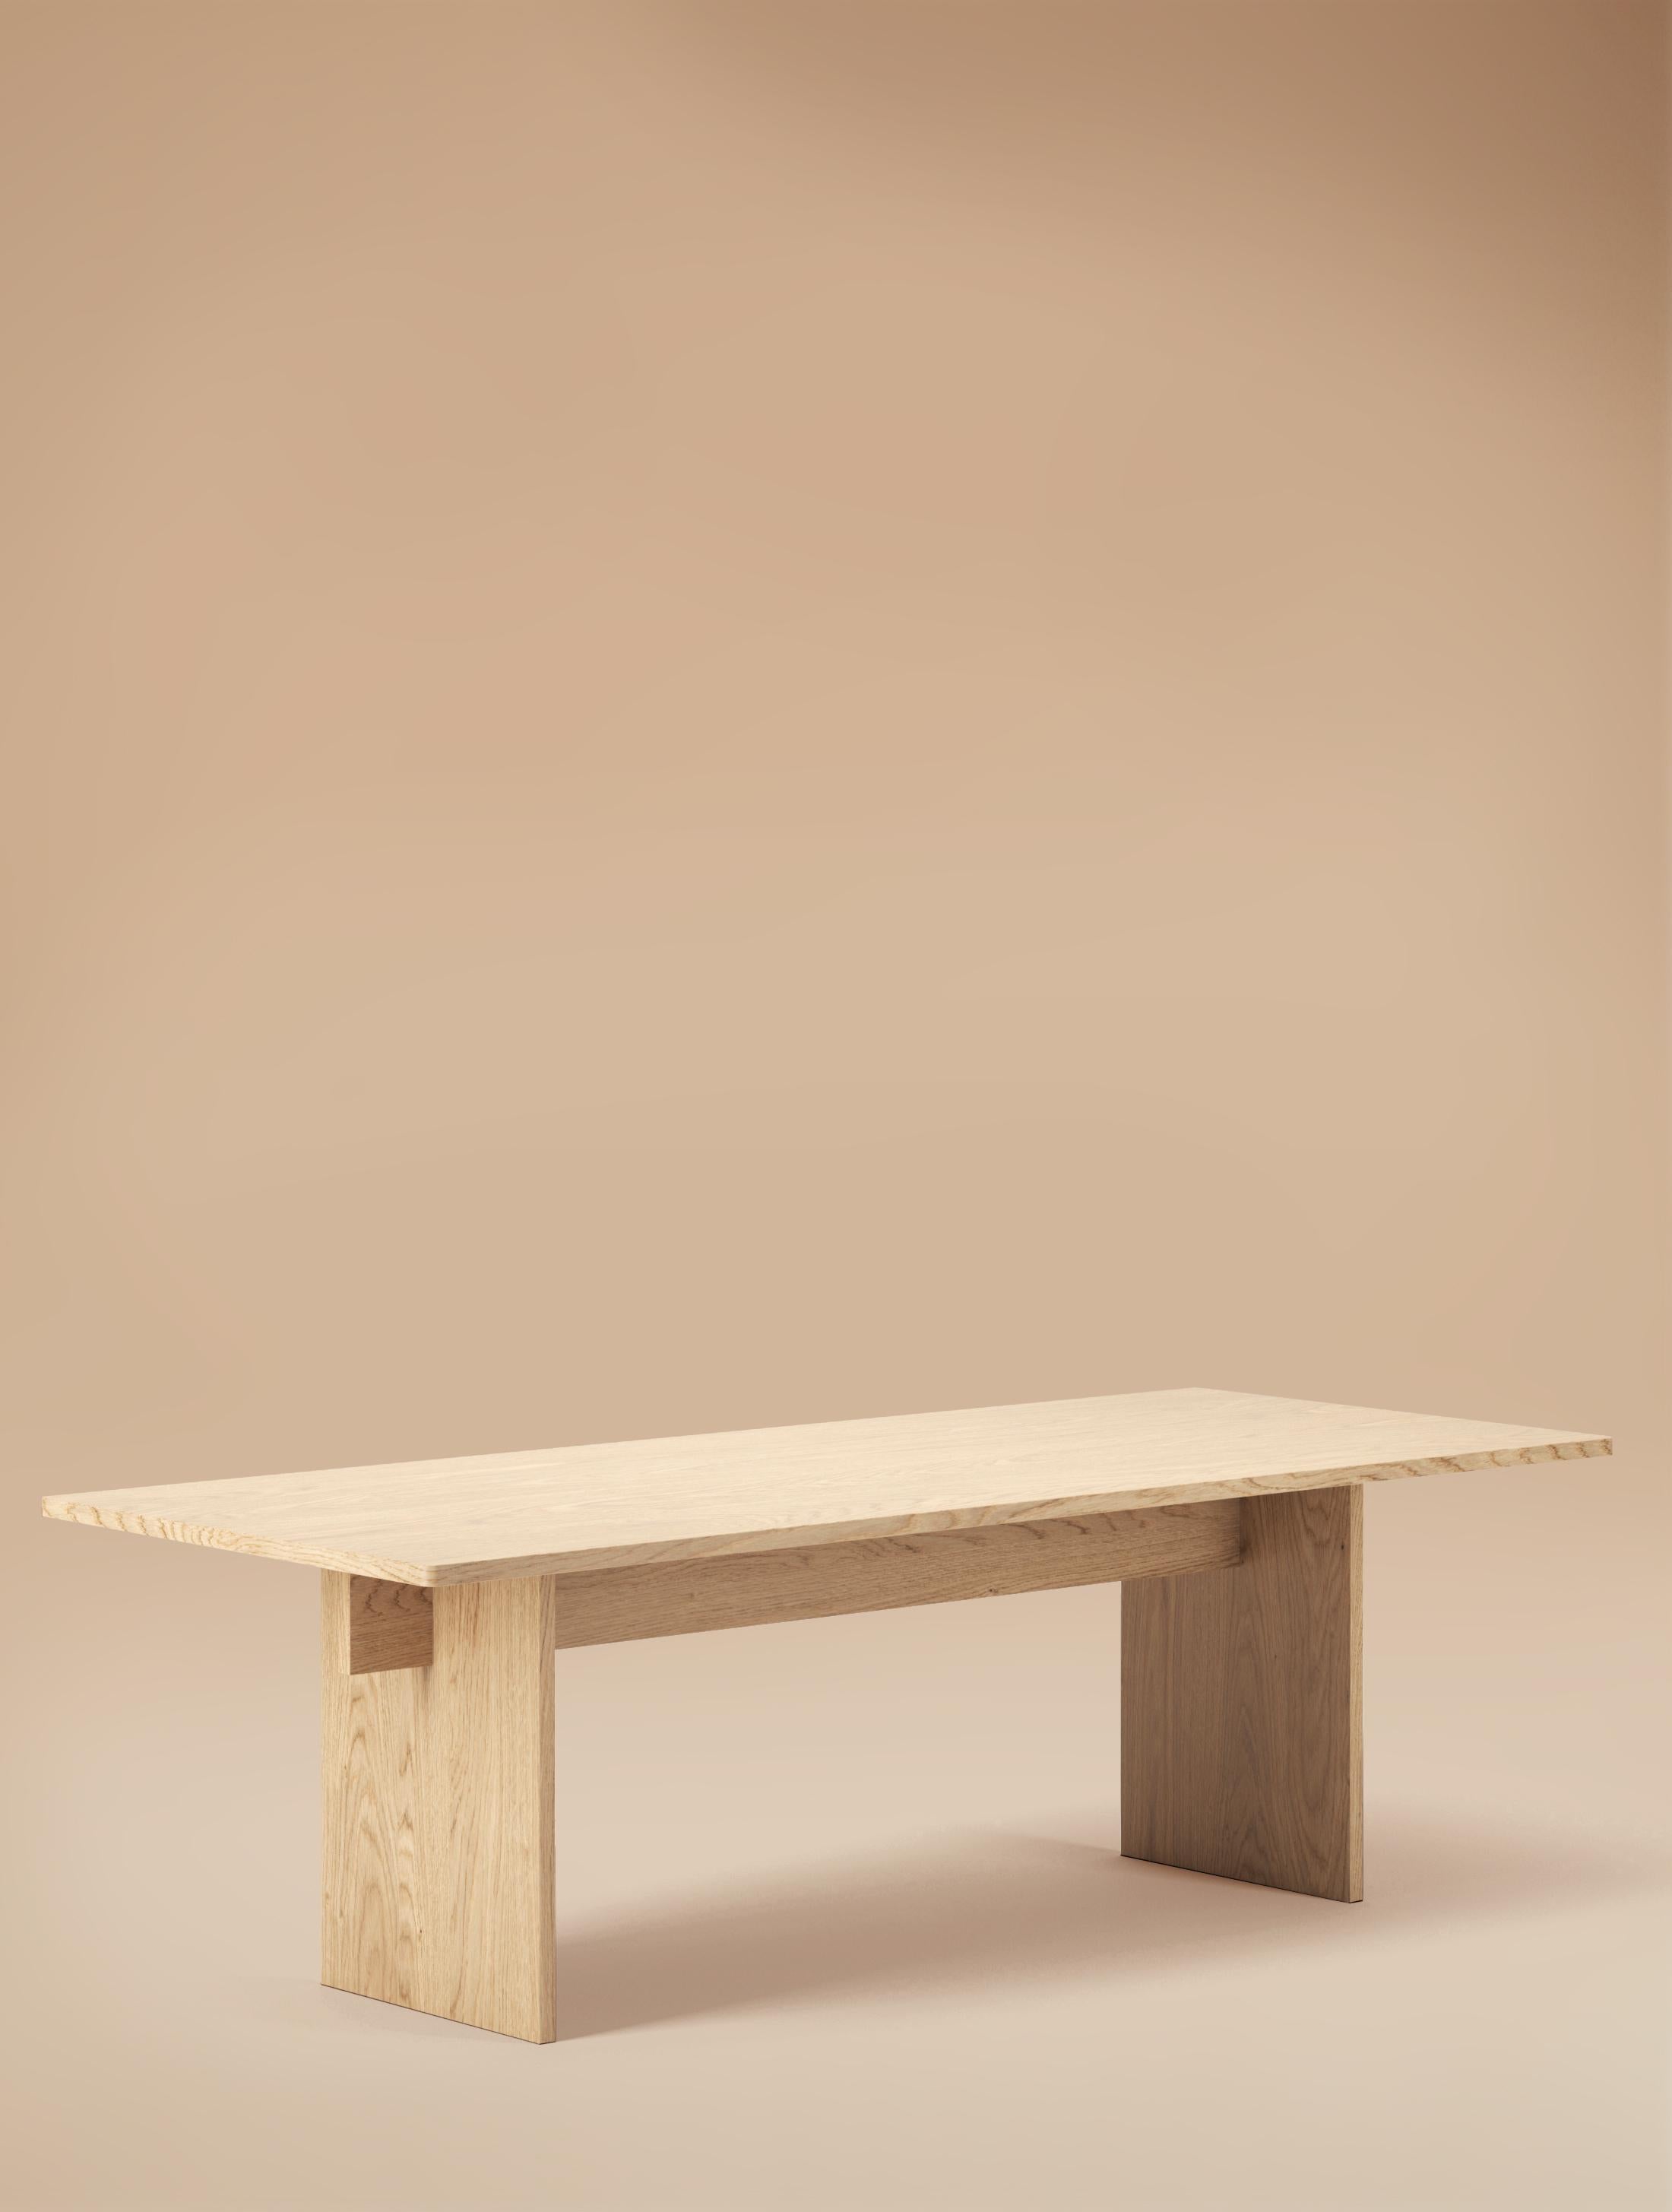 Contemporary 8 Seater Faure Table Handcrafted in Charcoal Oiled Oak by Kevin Frankental 